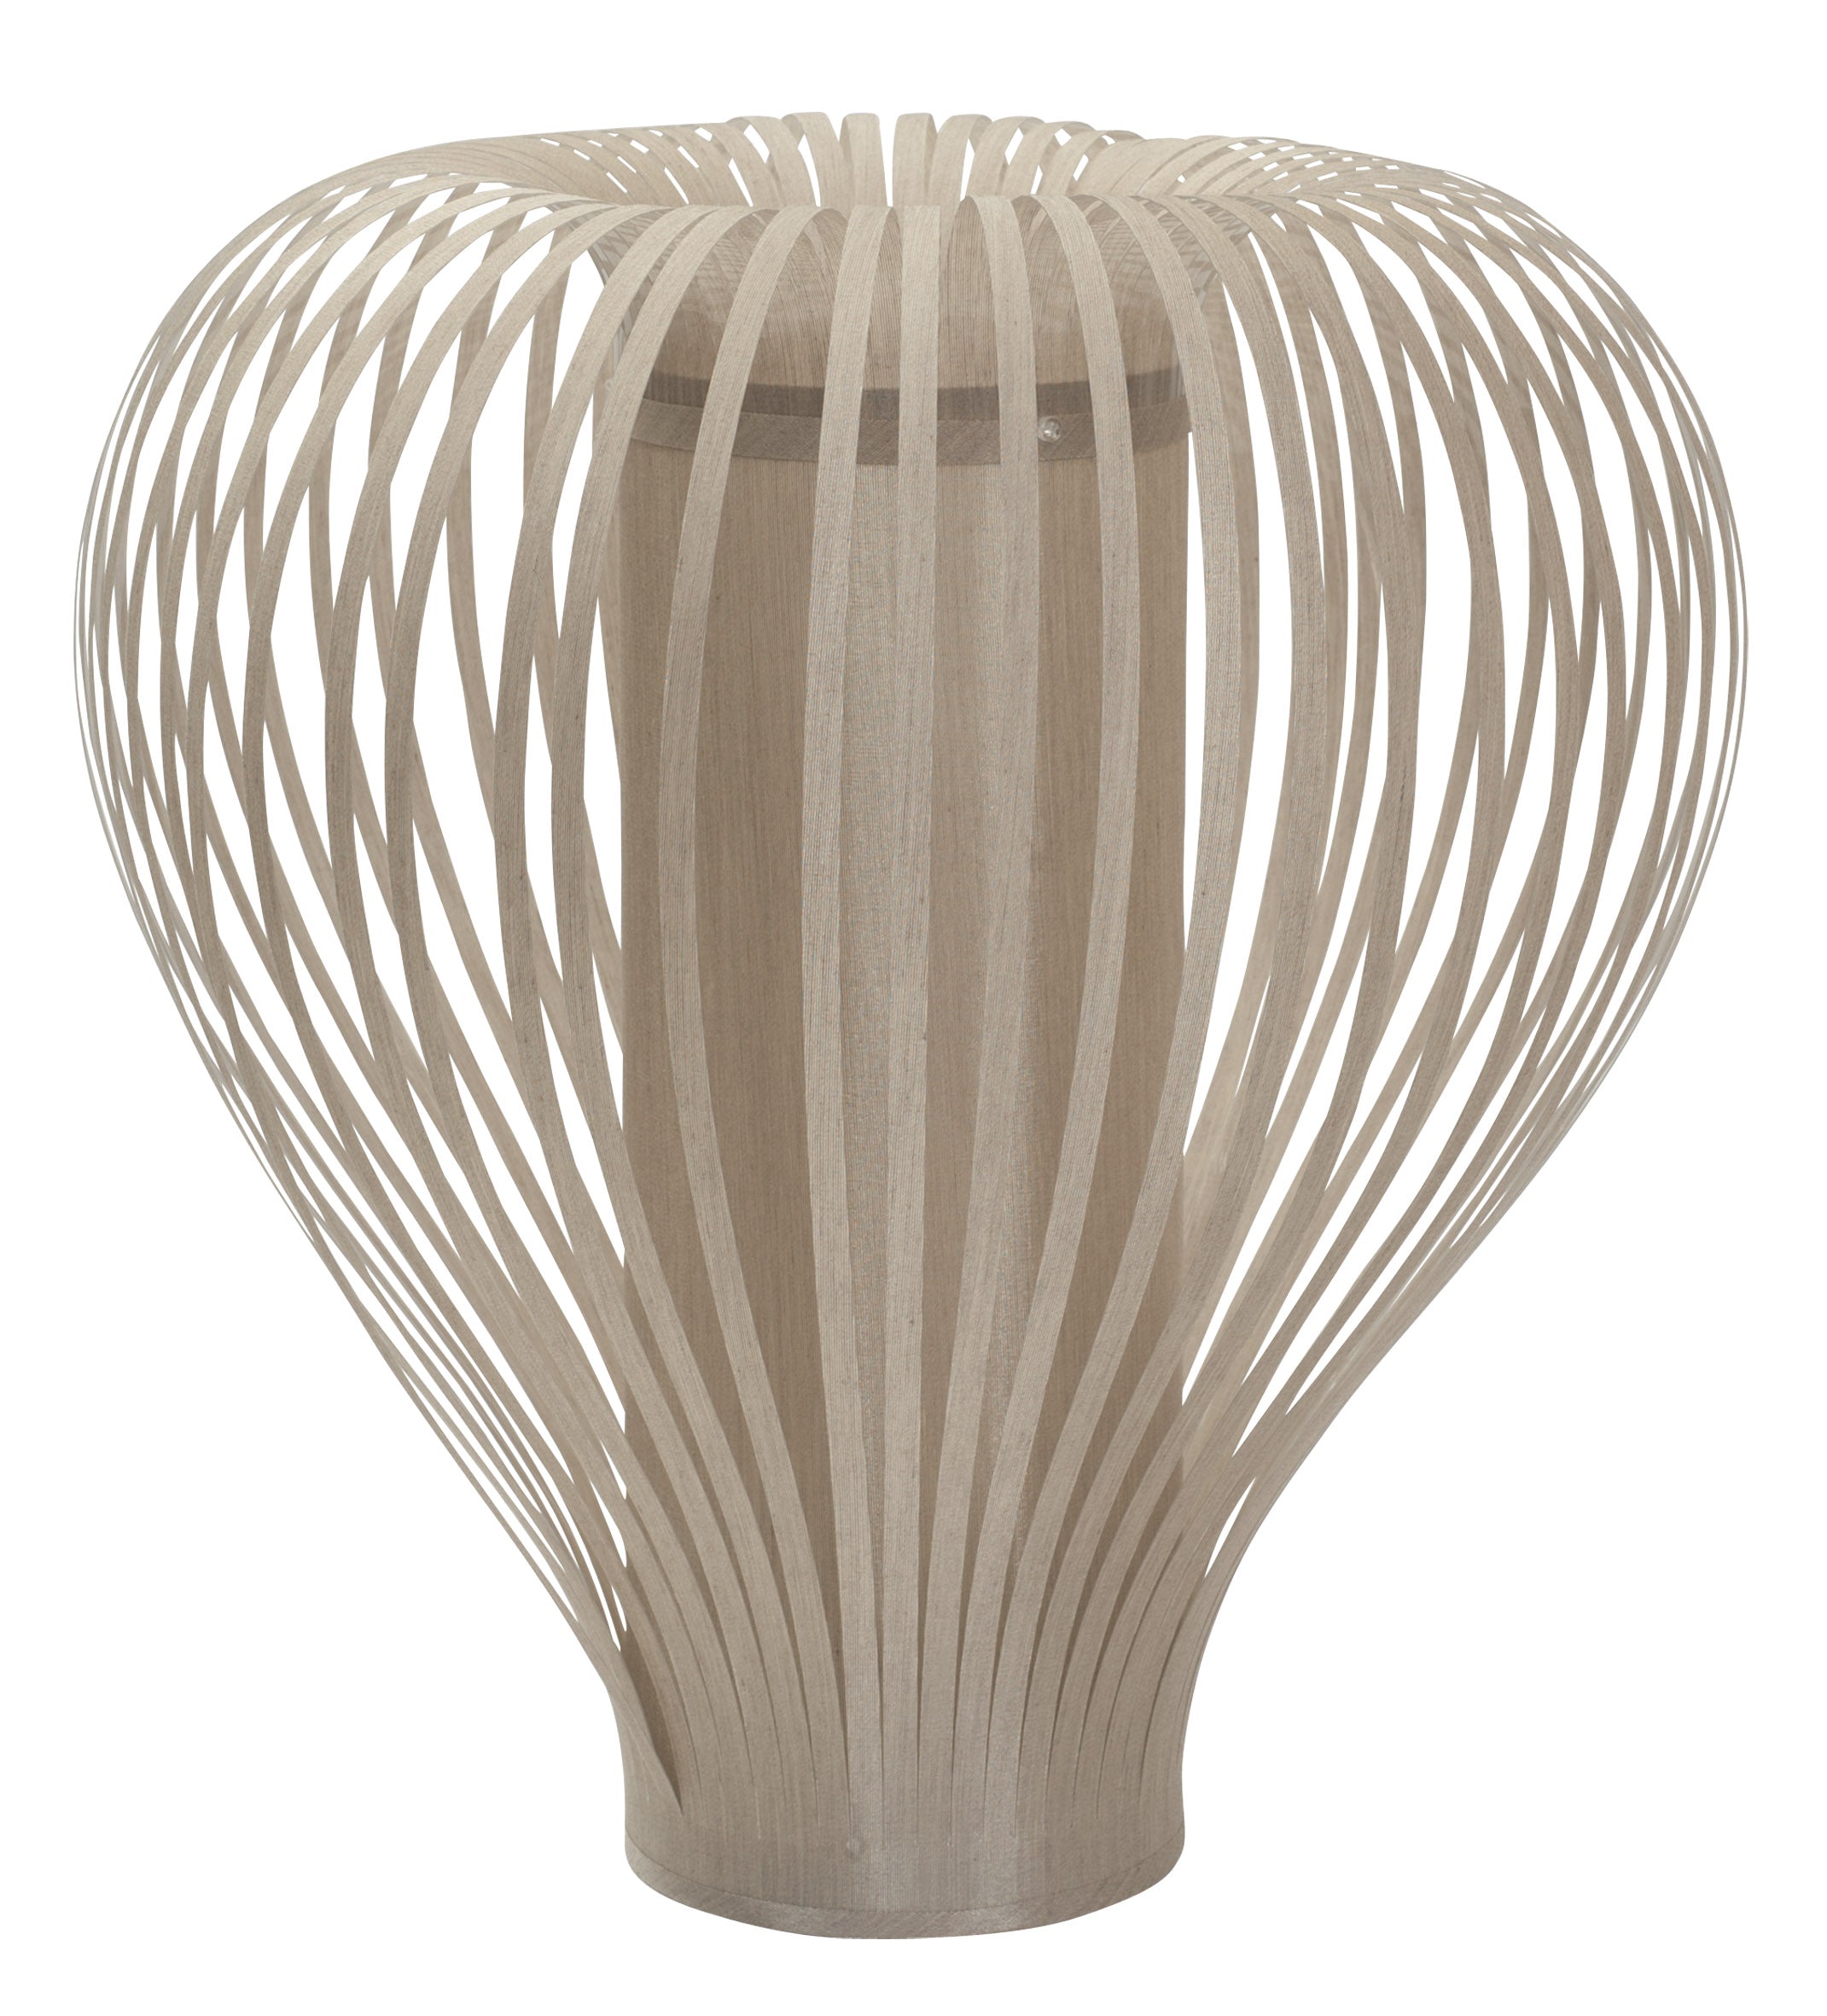 Taupe Balloon Table Lamp - The Nancy Smillie Shop - Art, Jewellery & Designer Gifts Glasgow